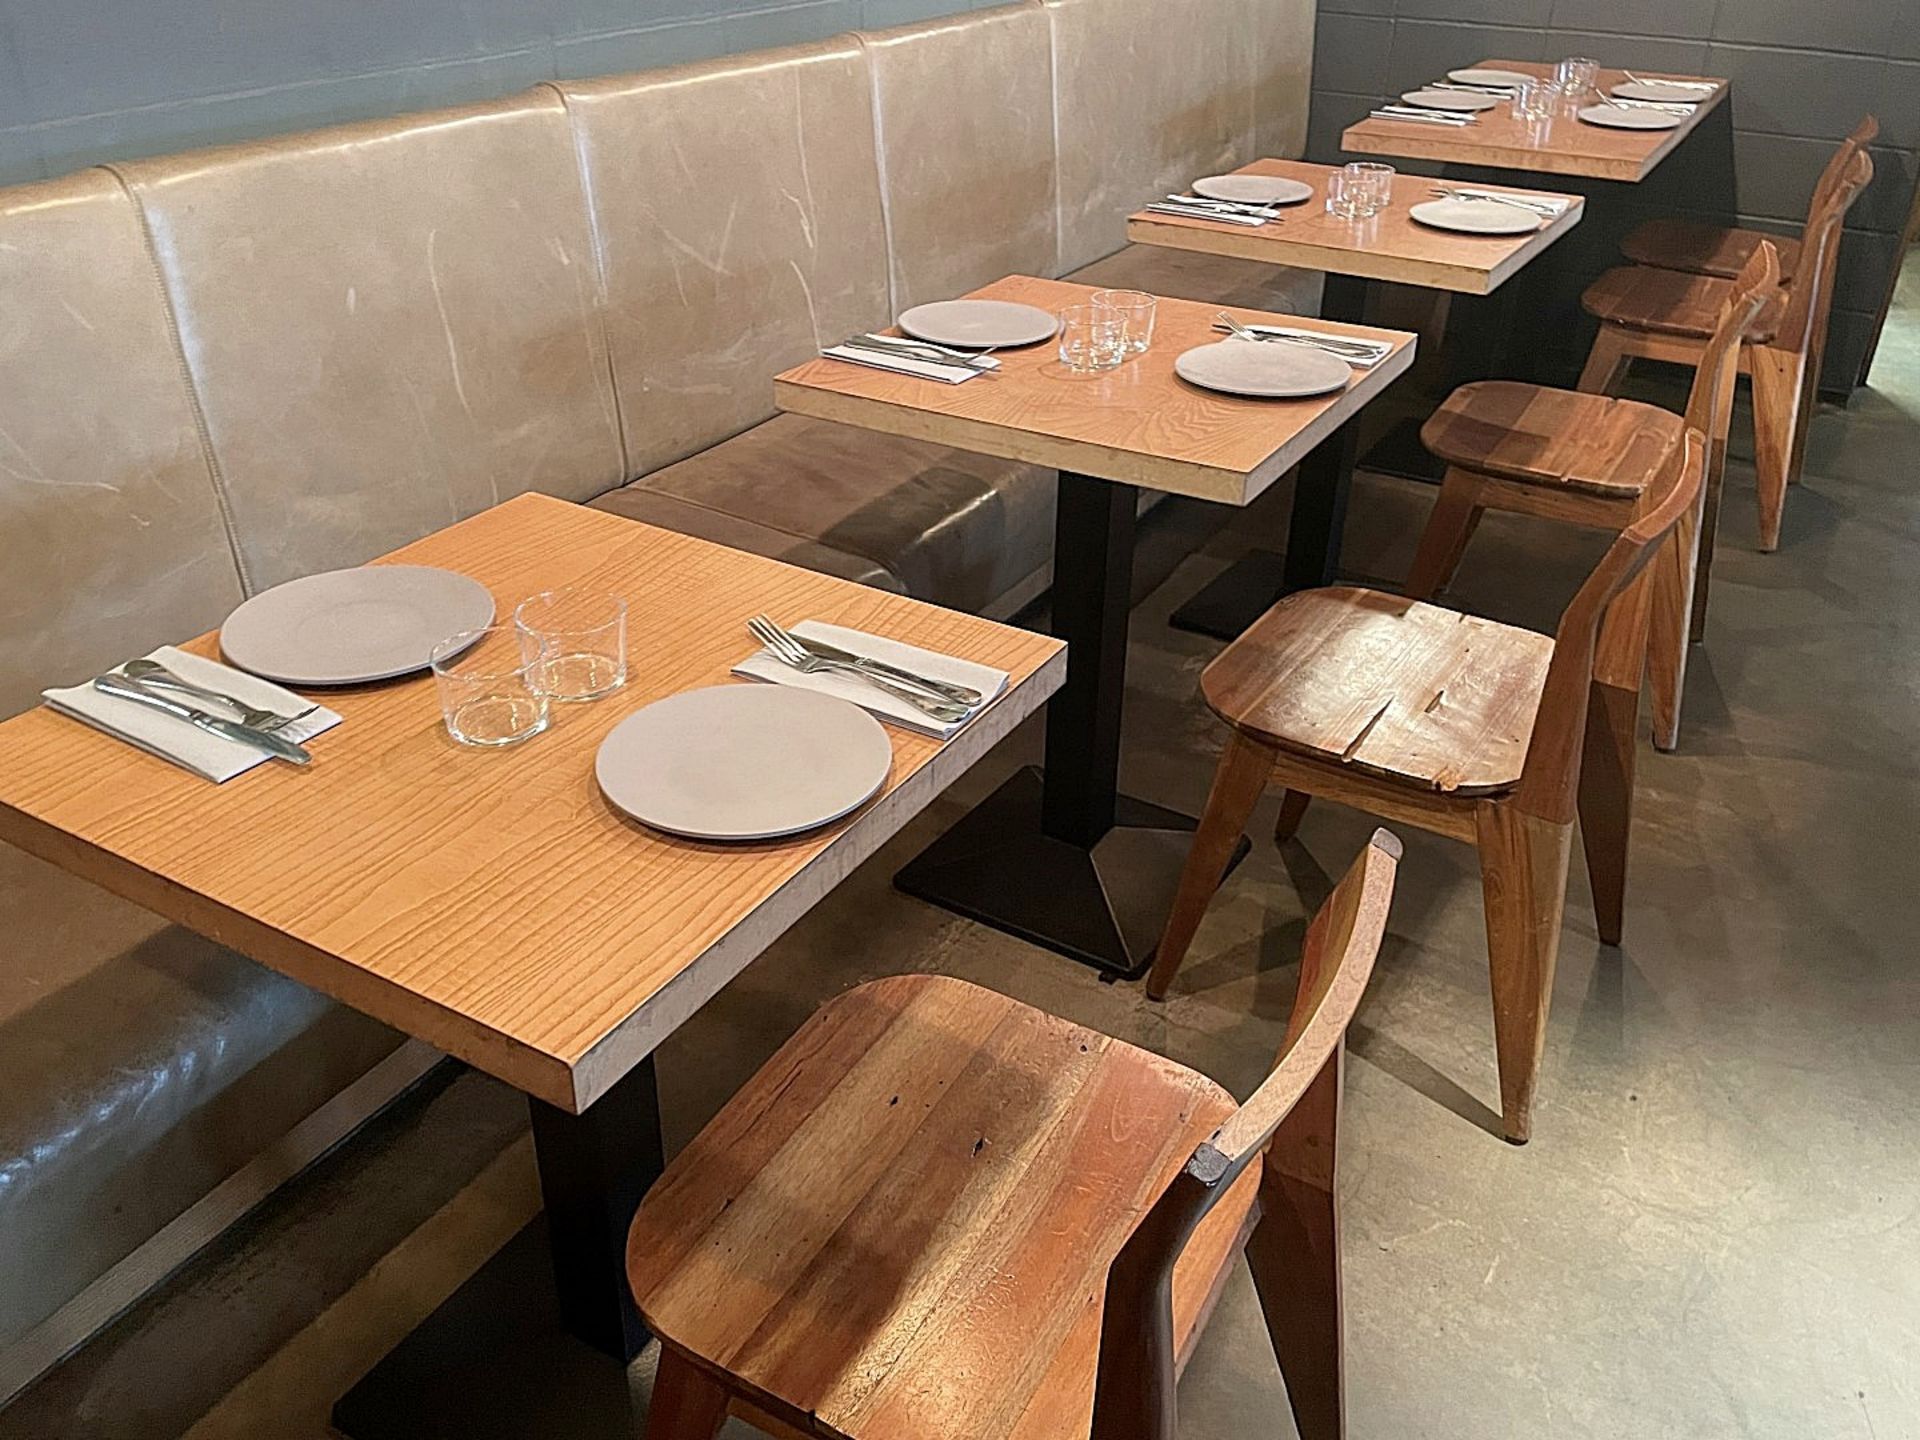 10 x Solid Wood Bistro Dining Chairs - Ref: MAN141 - CL677 - Location: London W1FThis item is to - Image 5 of 10